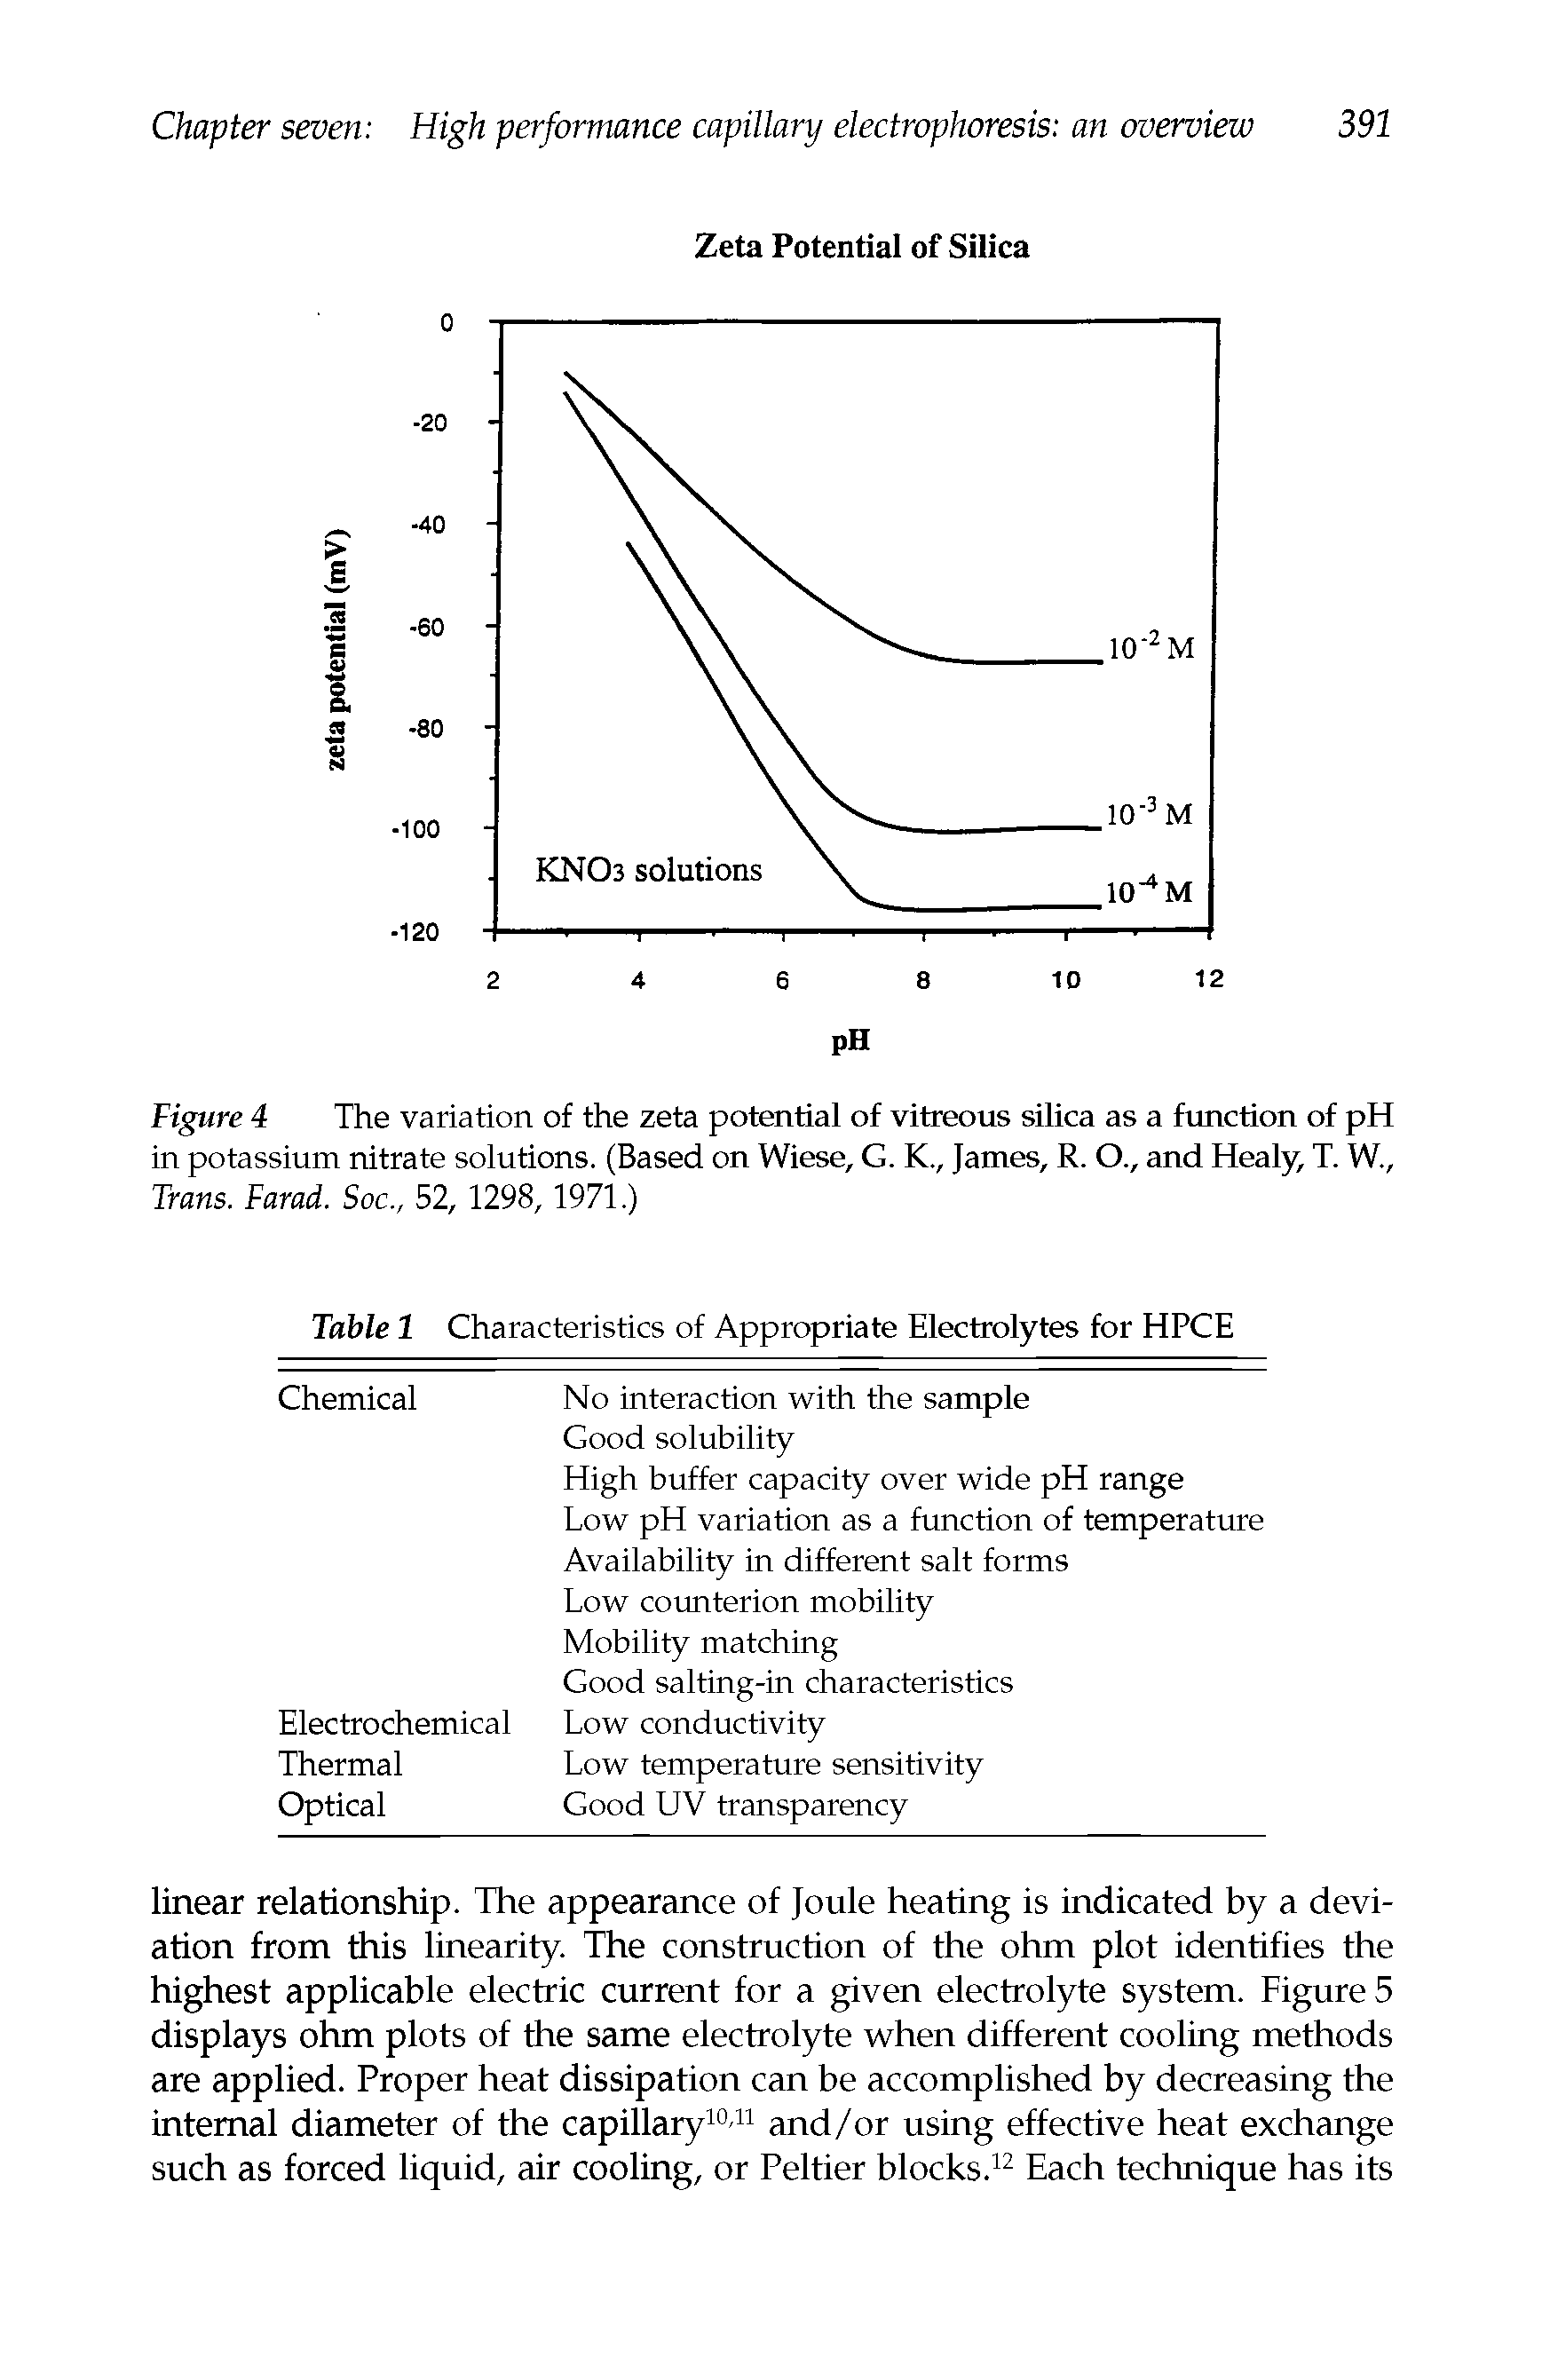 Figure 4 The variation of the zeta potential of vitreous silica as a function of pH in potassium nitrate solutions. (Based on Wiese, G. K., James, R. O., and Healy, T. W., Trans. Farad. Soc., 52, 1298, 1971.)...